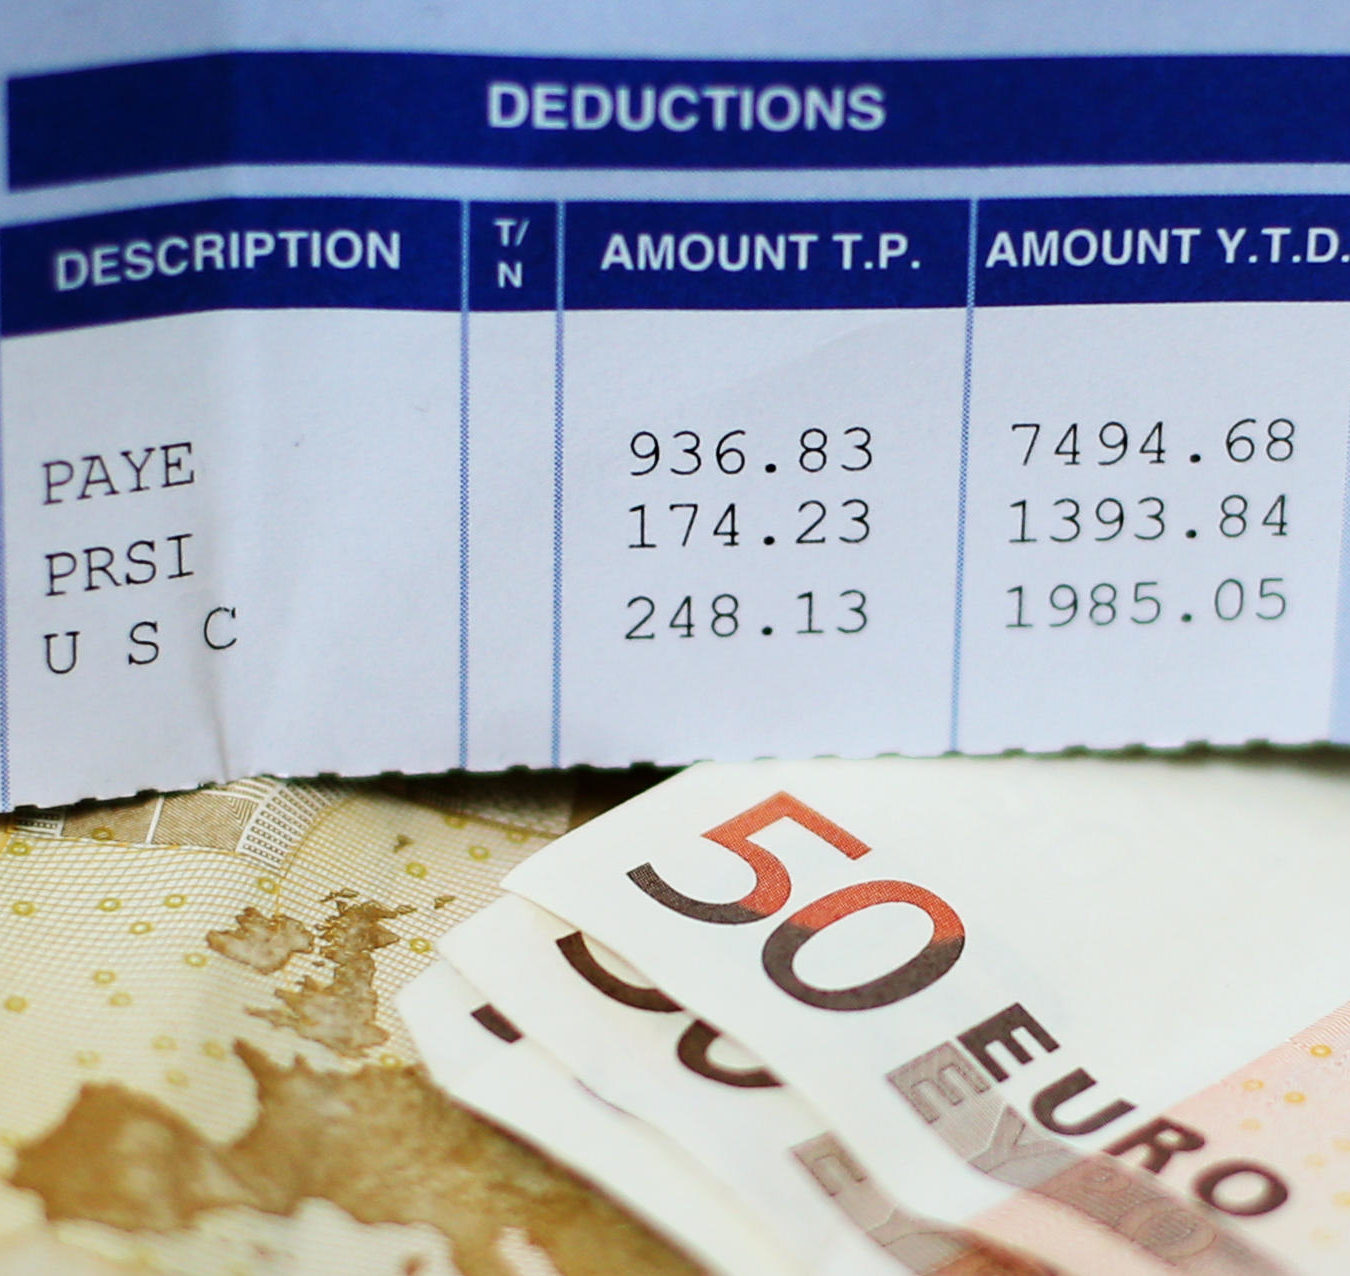 A payslip displaying tax deductions alongside €50 notes in 2014.